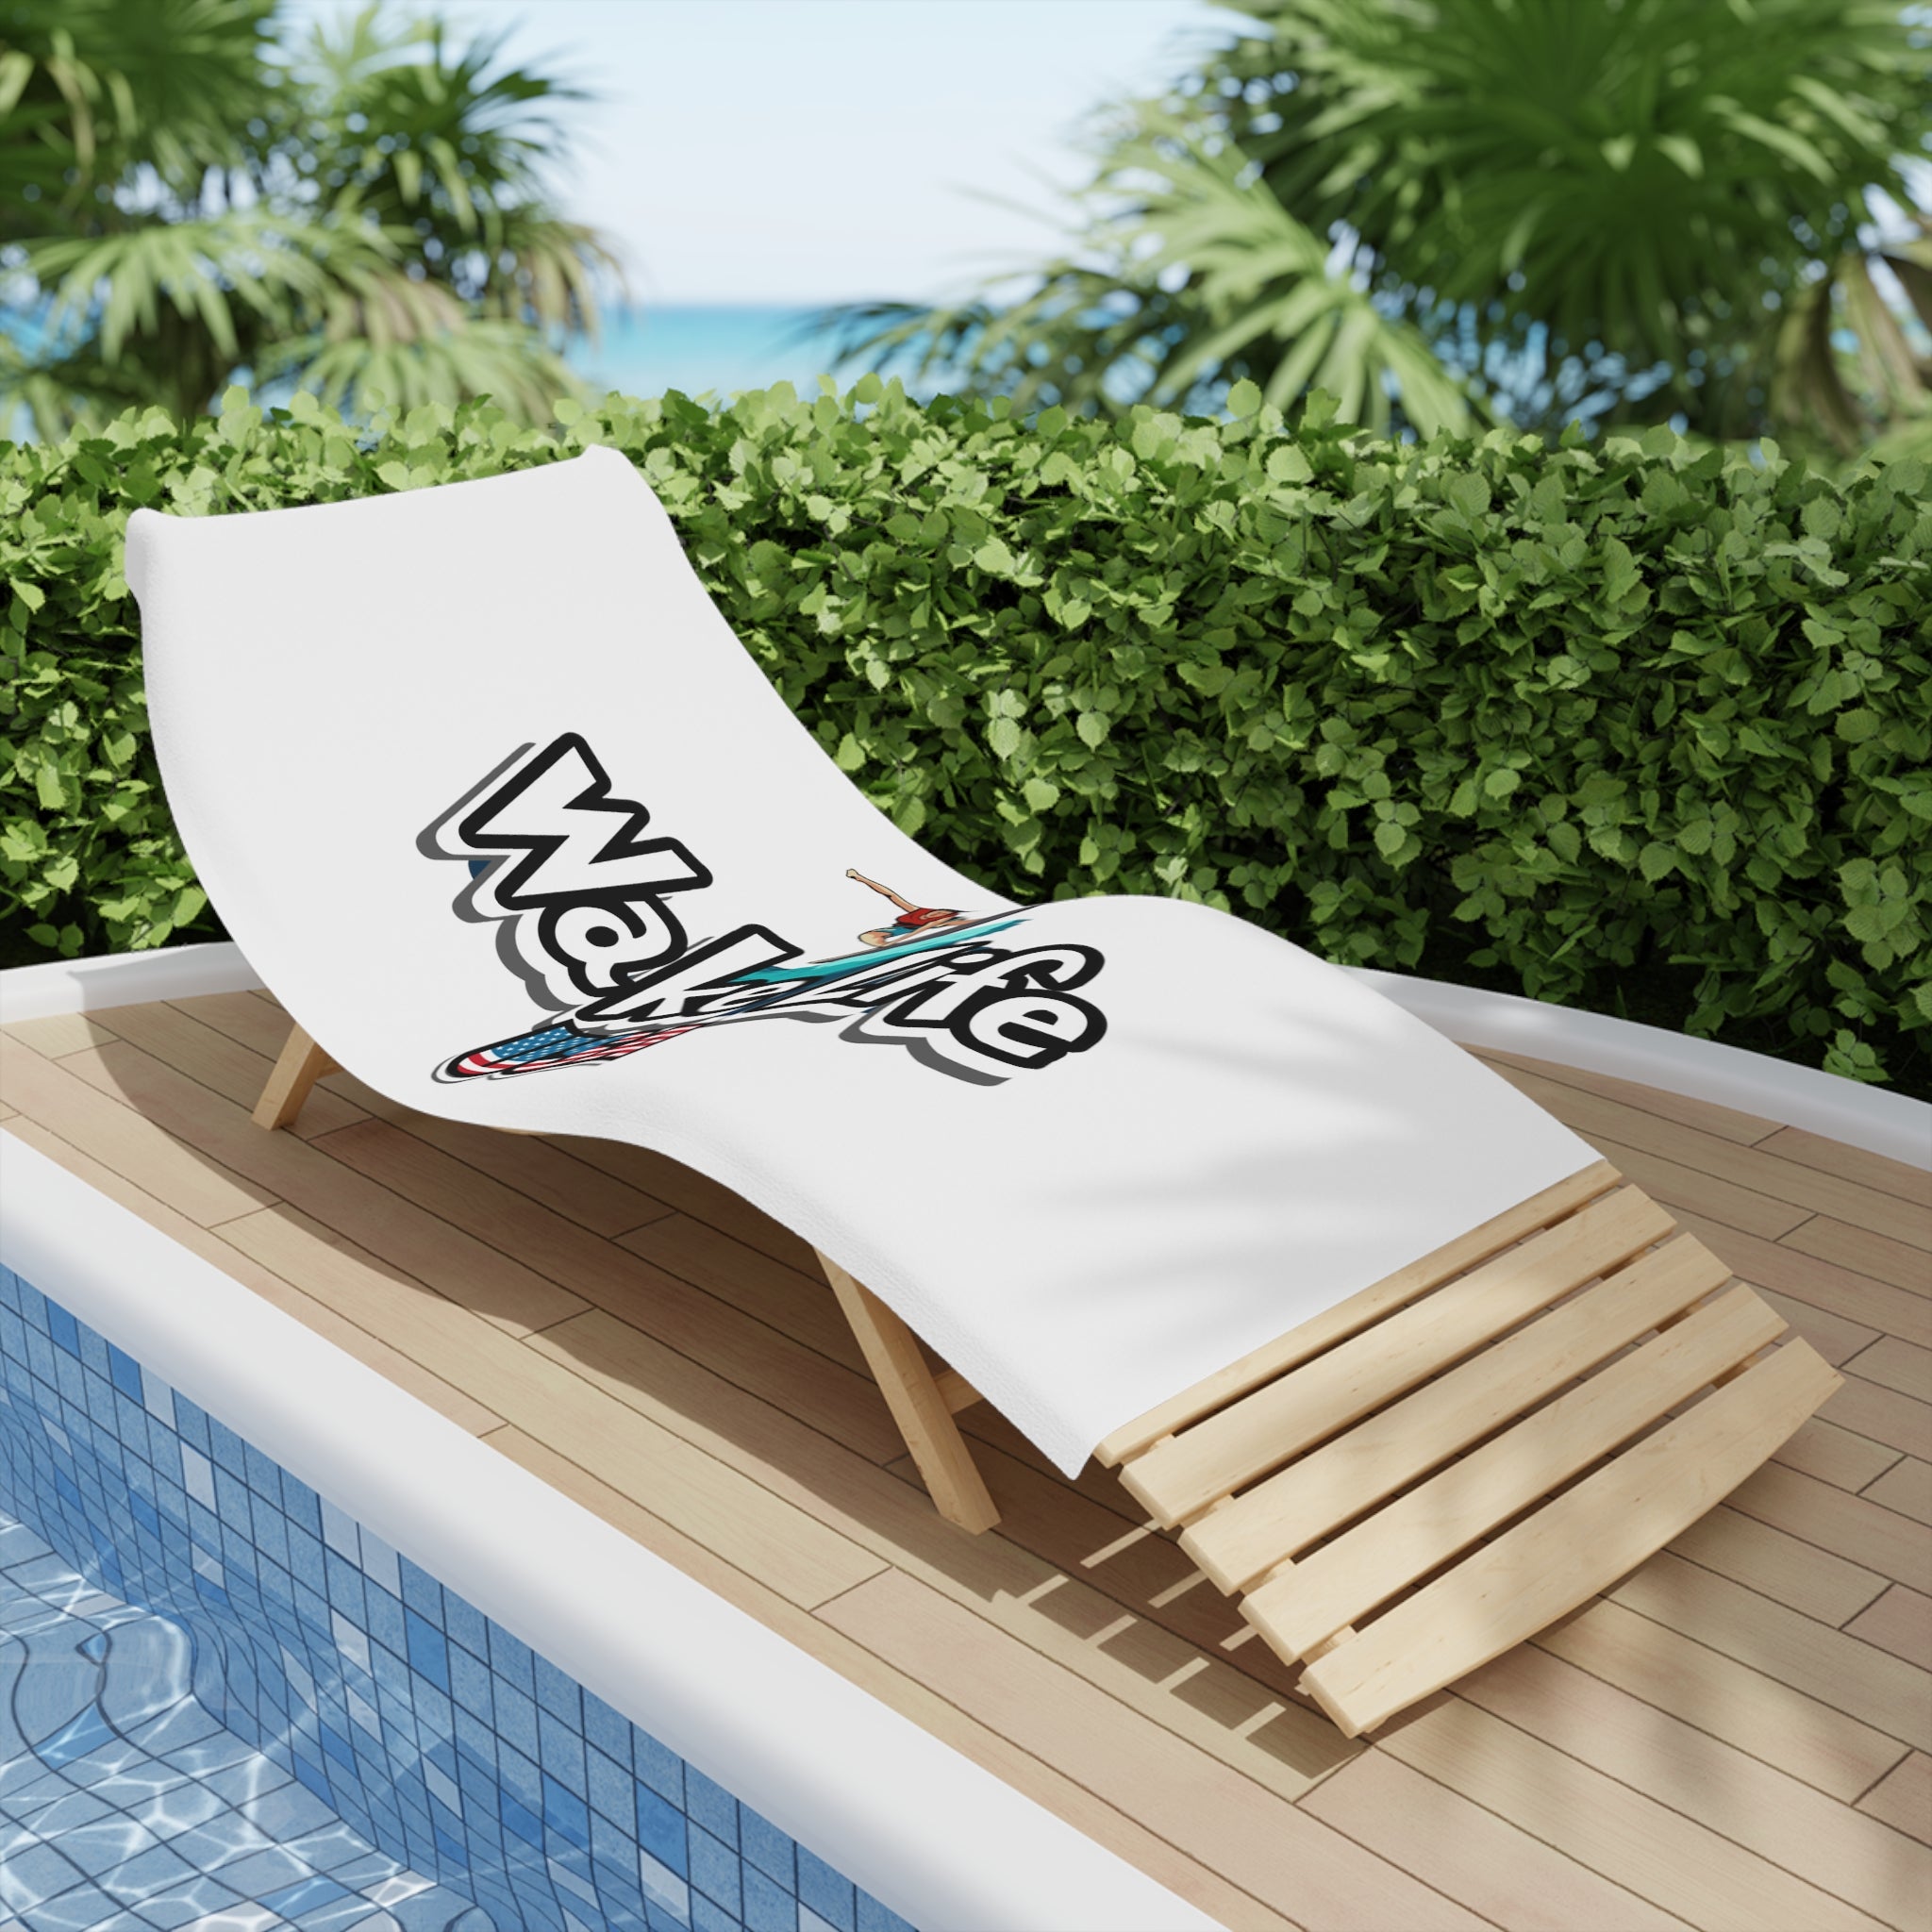 Dry off with this cool beach towel